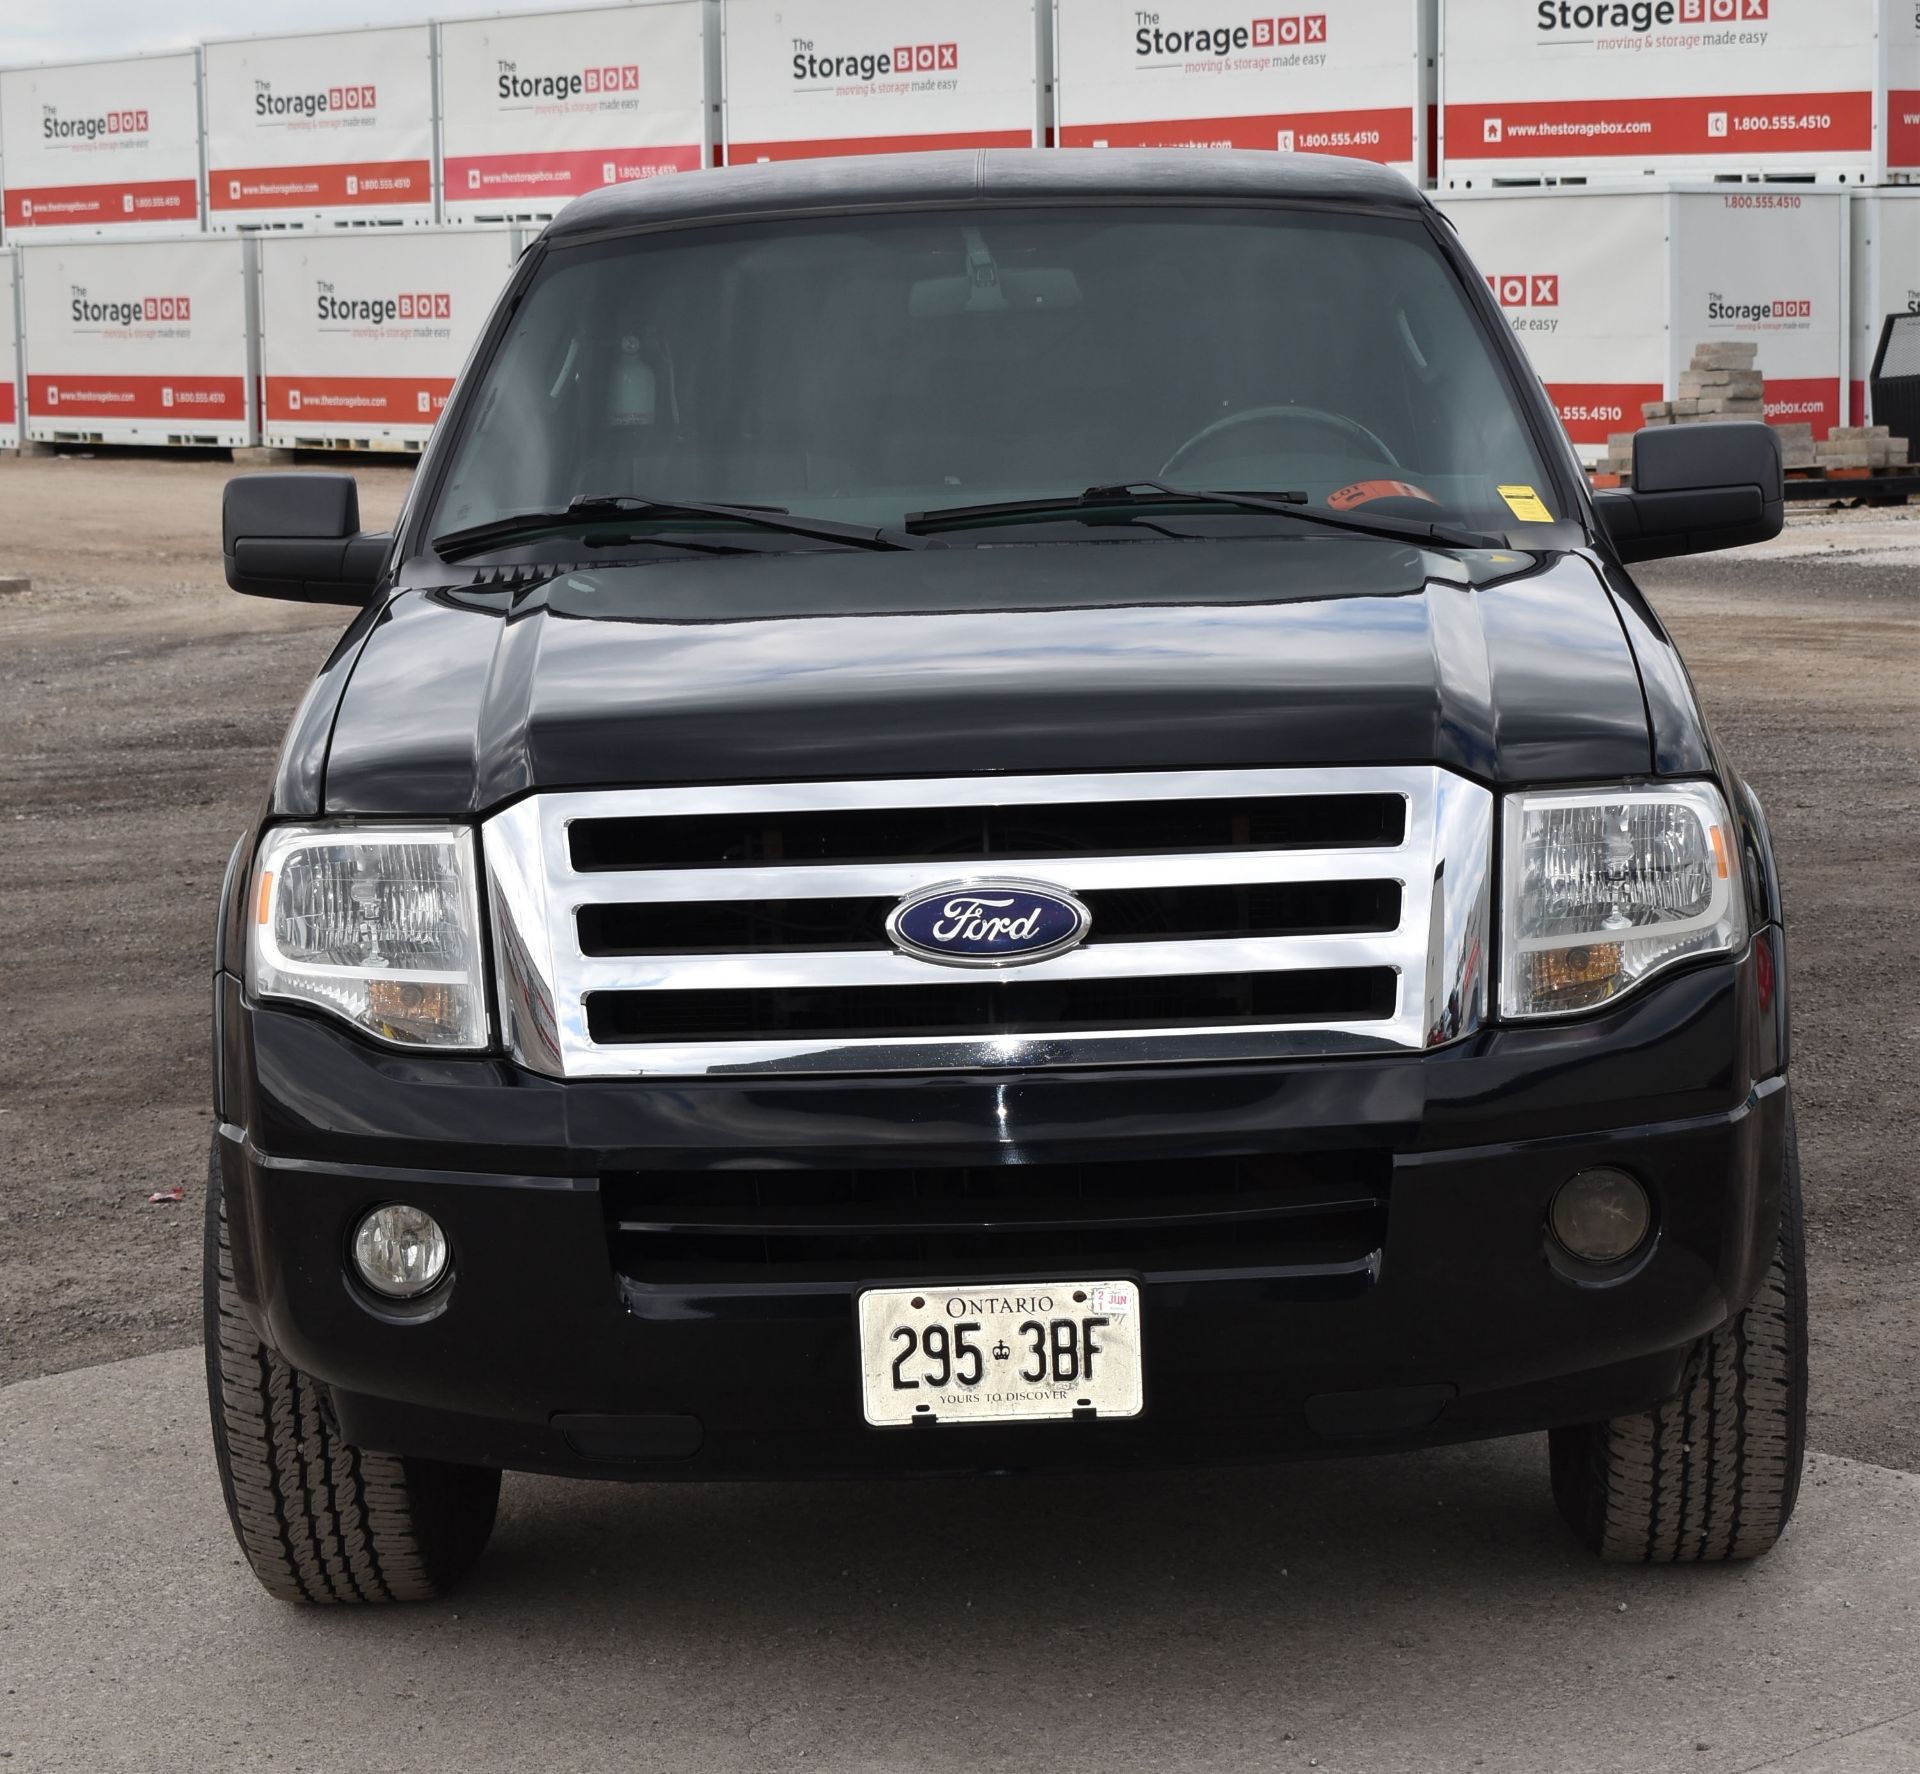 FORD (2008) EXPEDITION 14 PASSENGER STRETCH LIMOUSINE WITH 8 CYLINDER 5.4L GAS ENGINE, 177,845KM ( - Image 2 of 26